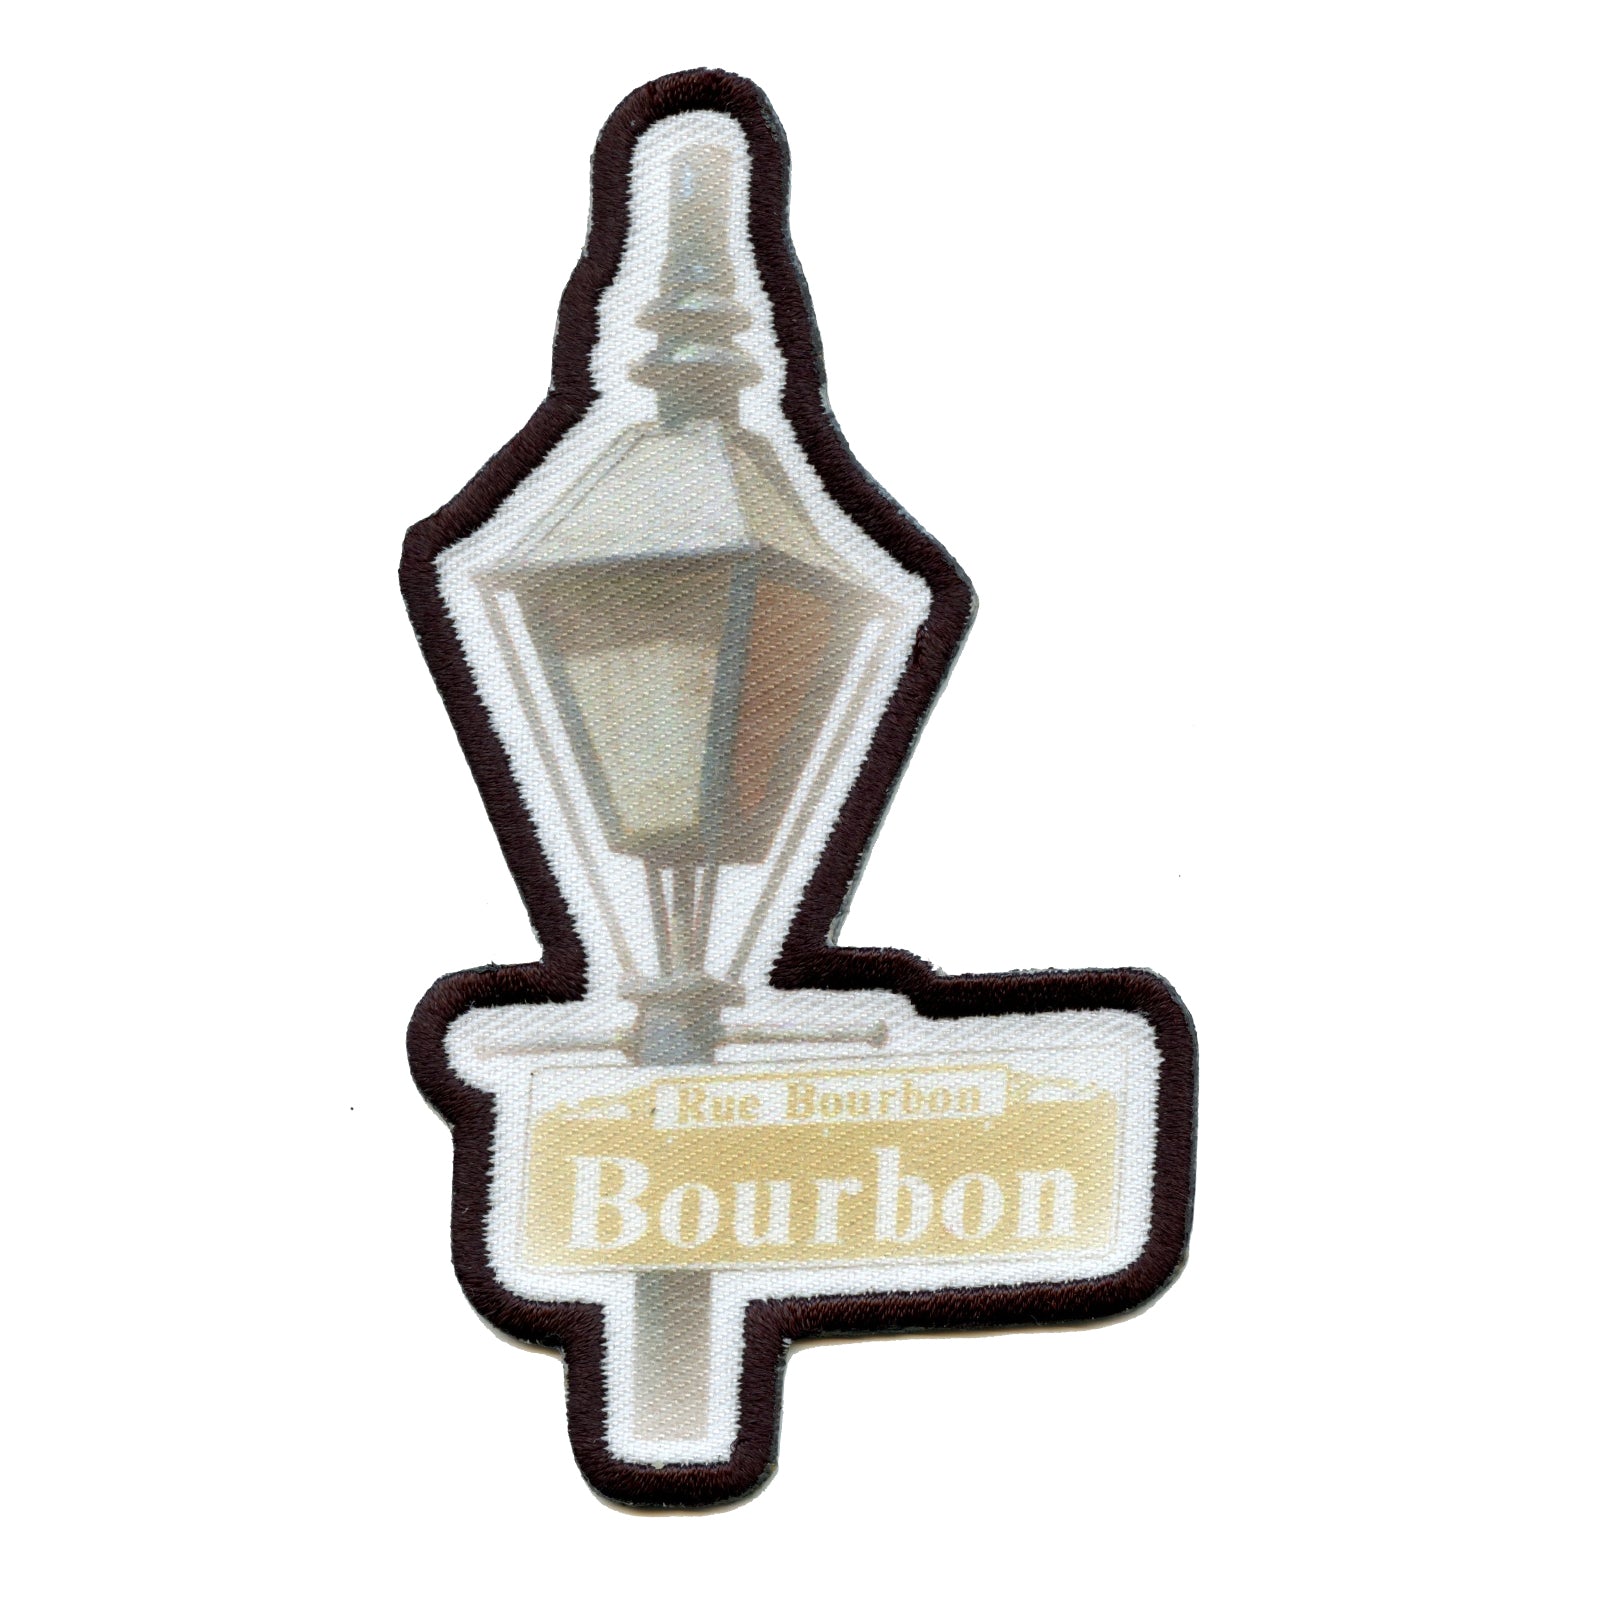 New Orleans City Bourbon Street Light Post Embroidered Iron On Patch 